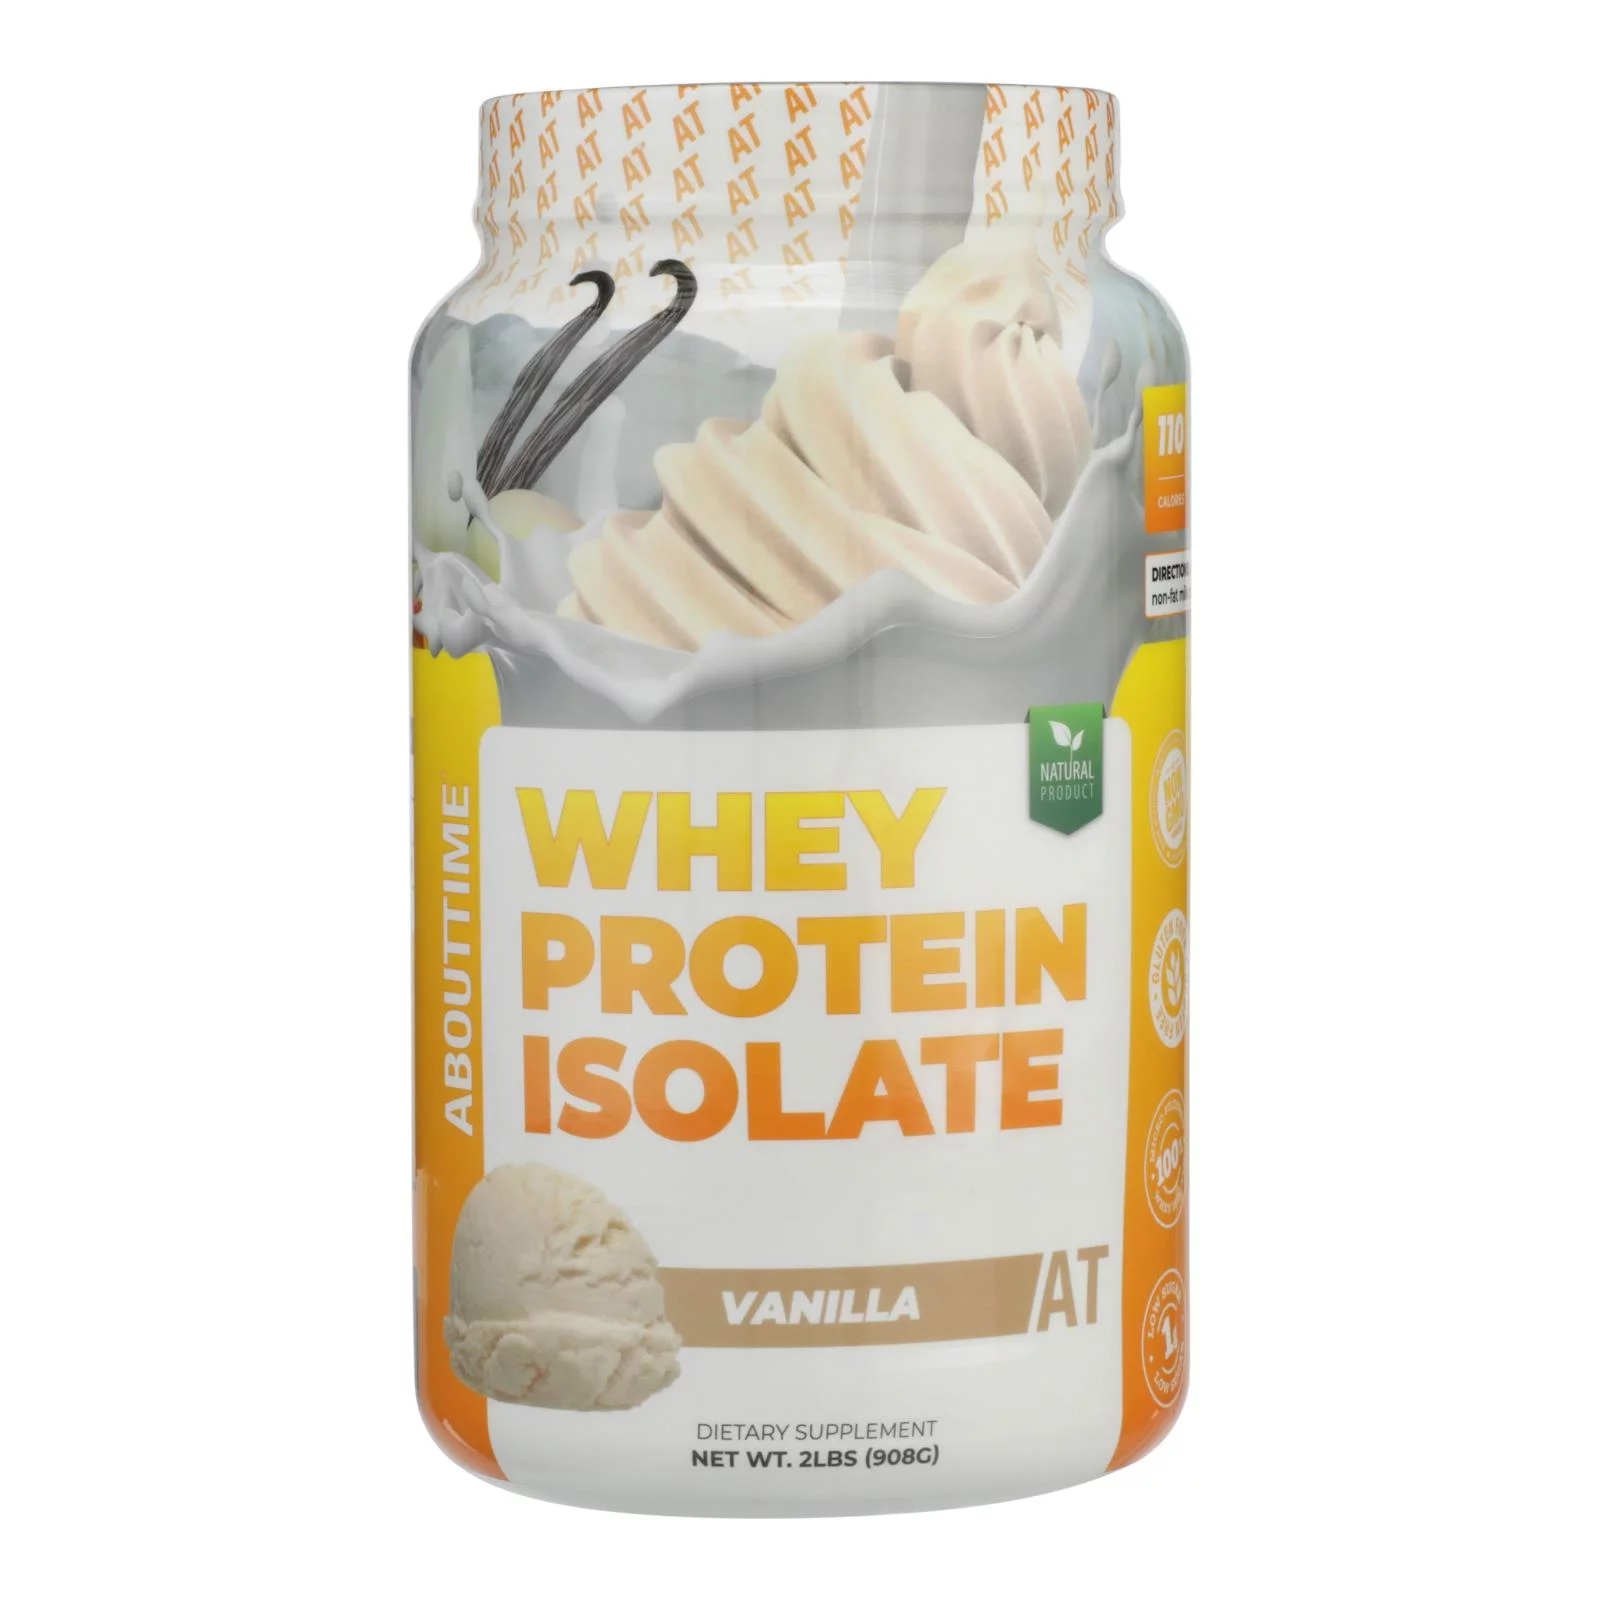 About Time Whey Protein Isolate Vanilla, 2 Lb.